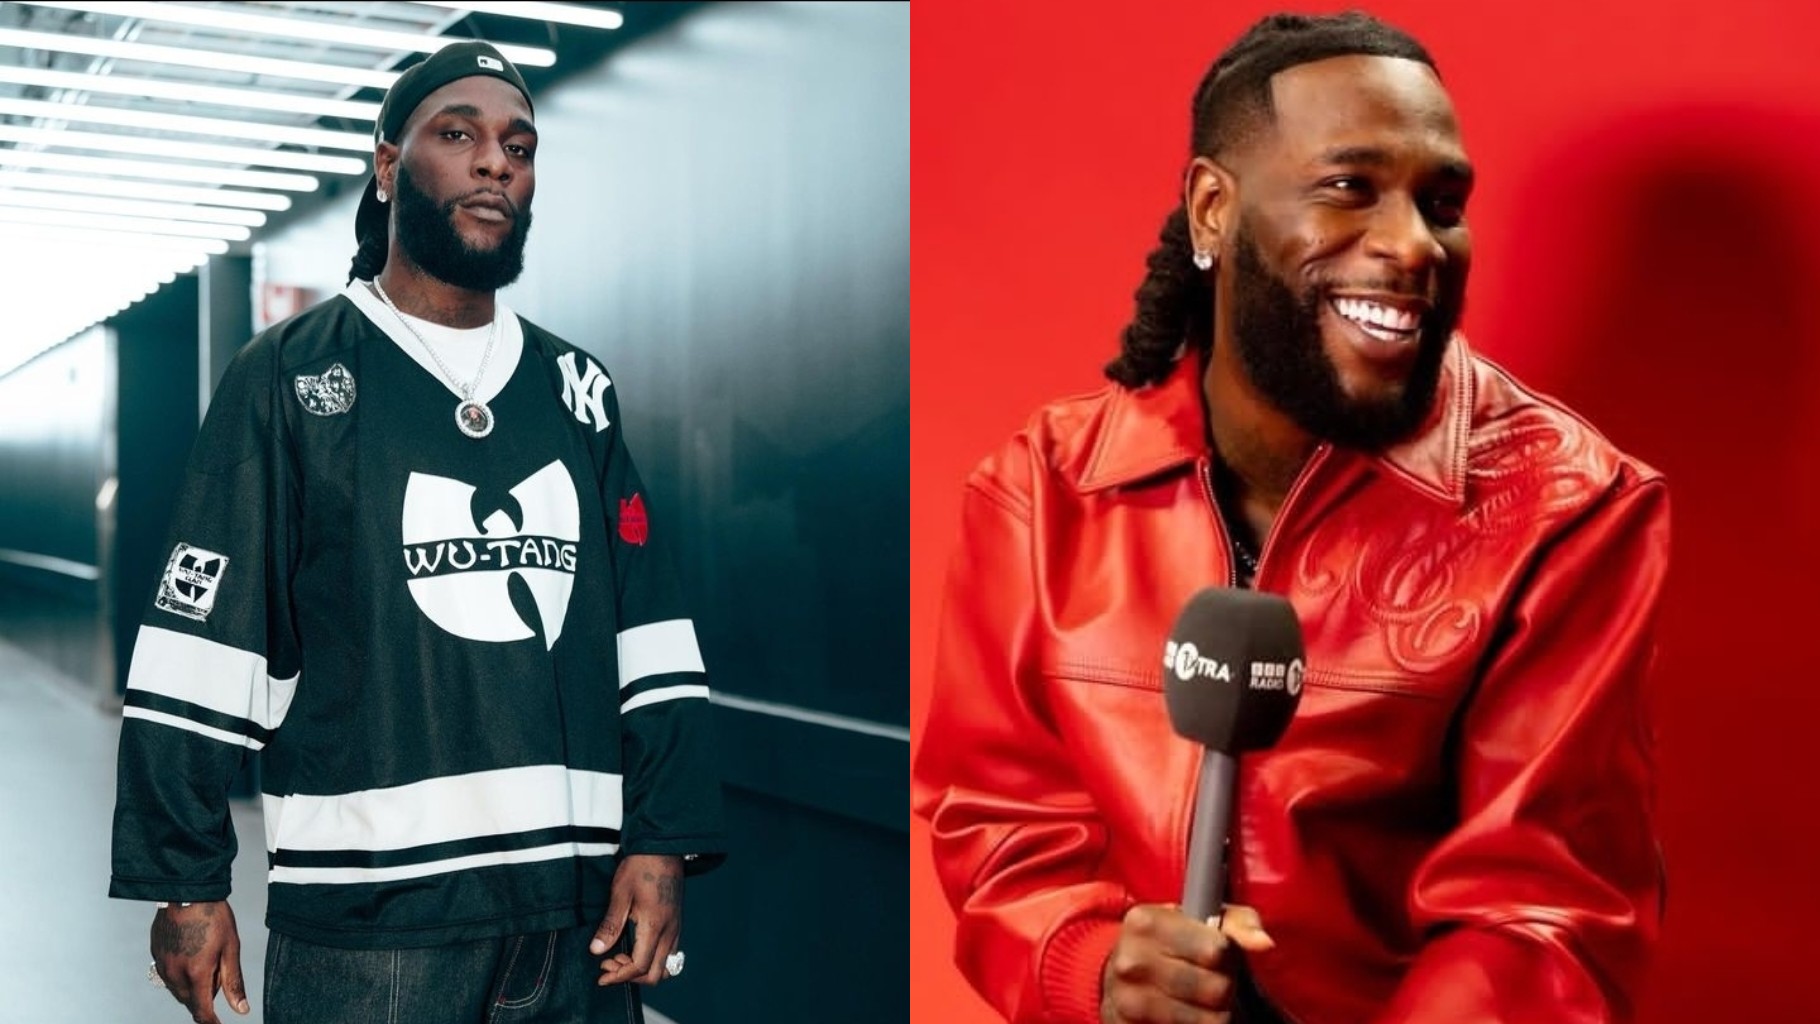 Singer Burna Boy creates history as he becomes first African artiste to sell out Mercedes Benz Arena in Germany (Video)